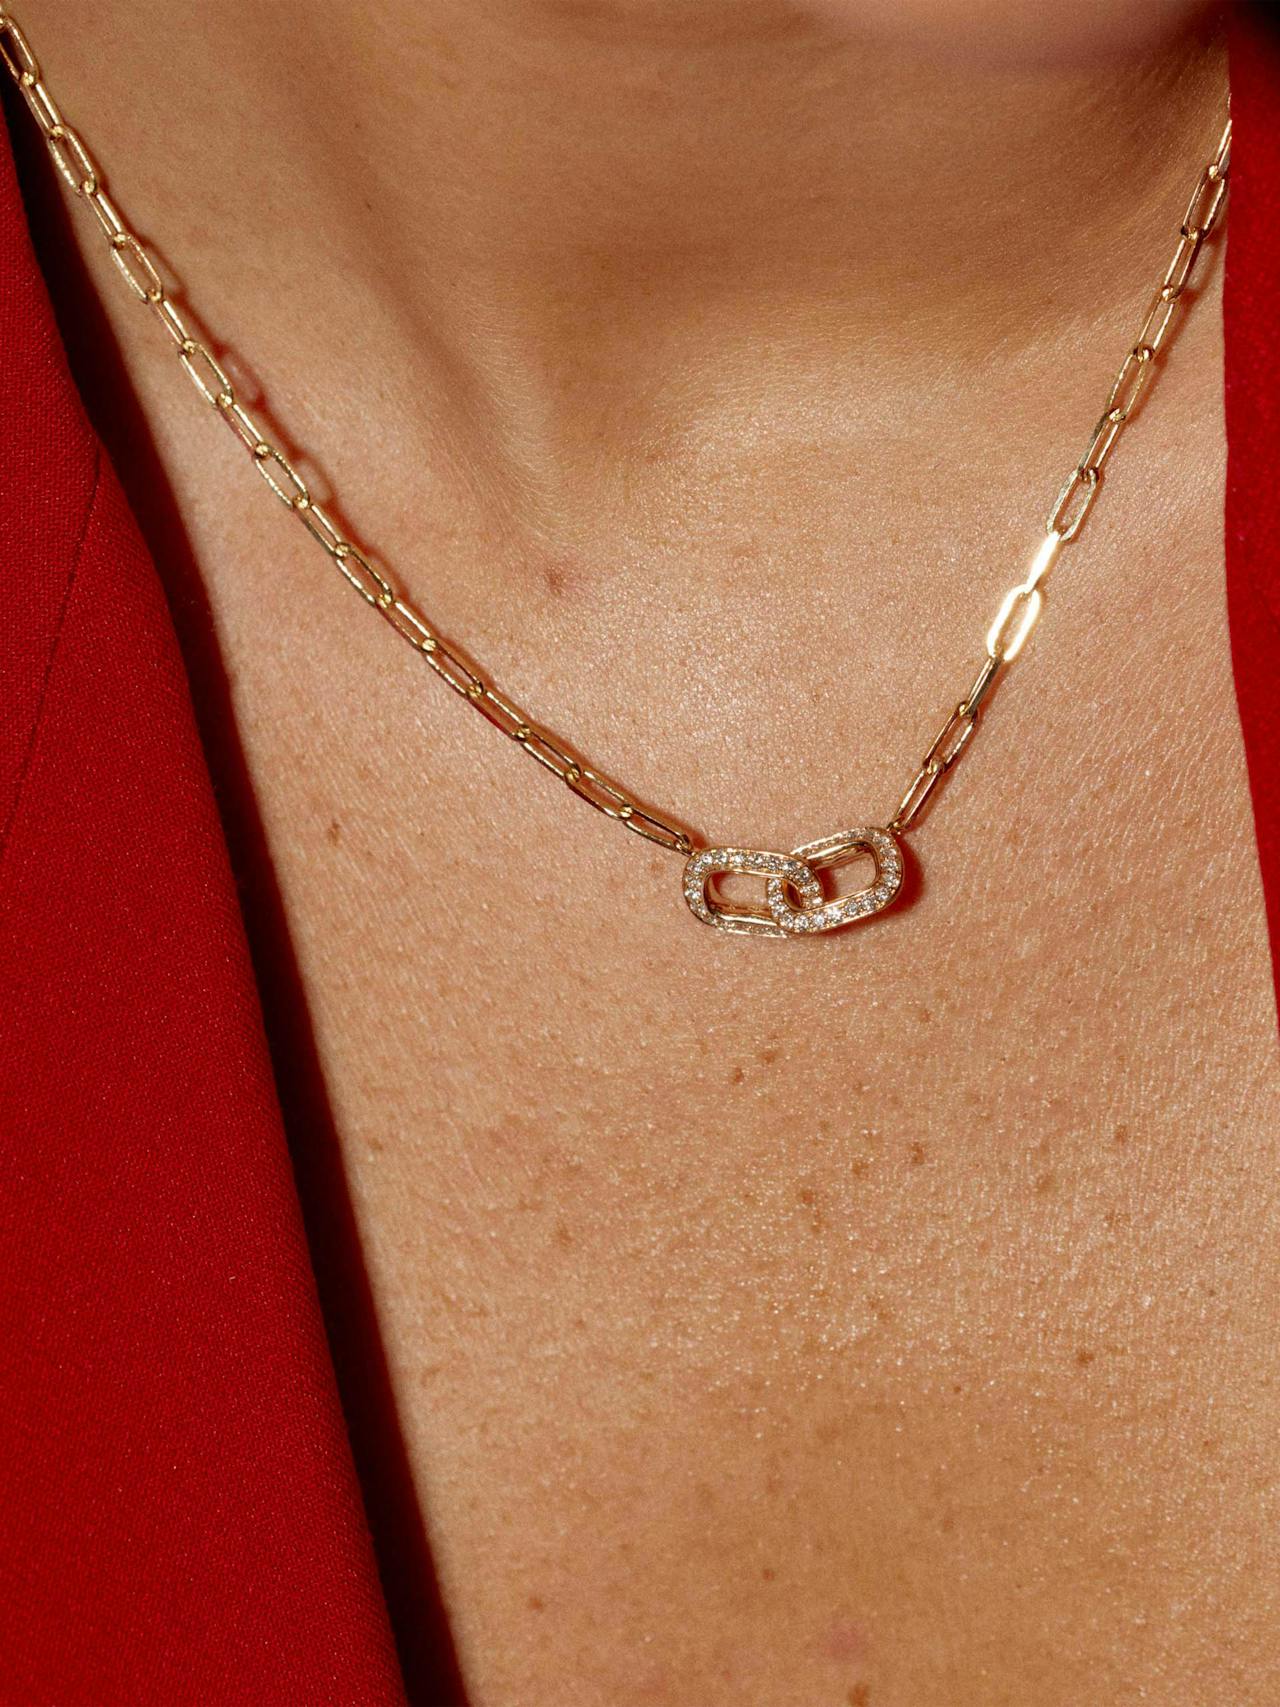 A succession of 18k polished gold chains are connected together to meet two bold brushed gold links in the middle, holding 42 brilliant lab-created diamonds with a total of 0.63ct.